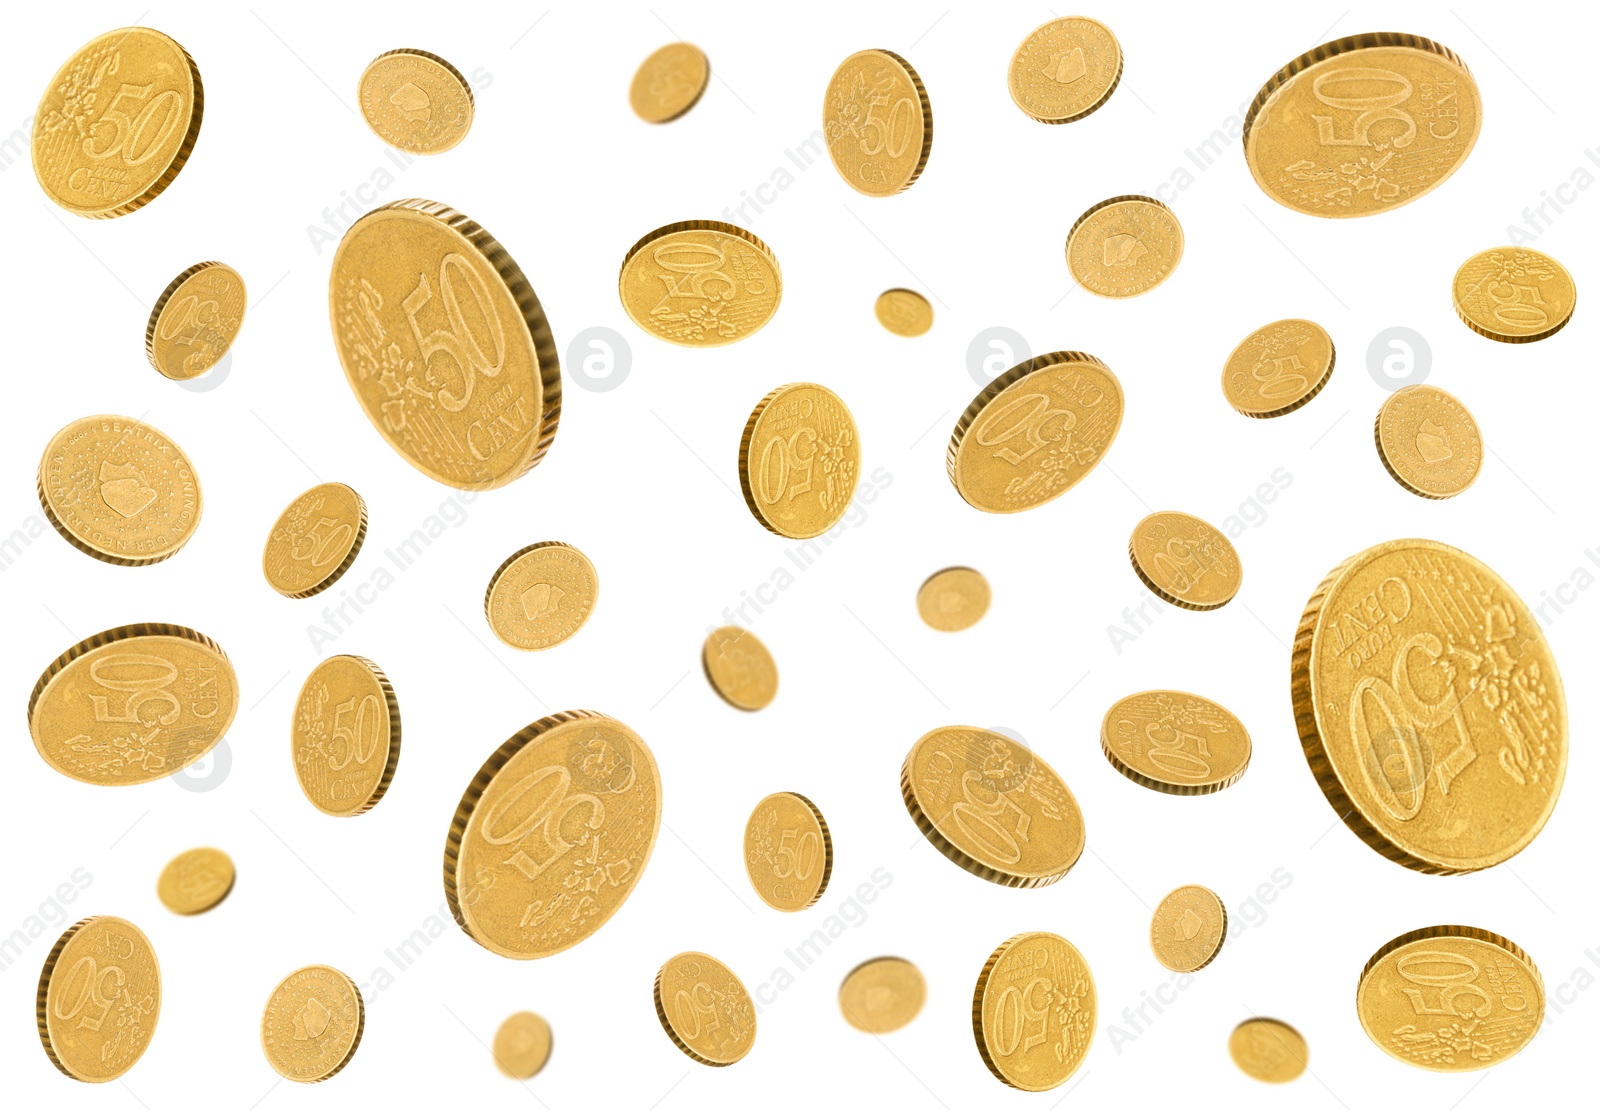 Image of Flying euro cent coins on white background